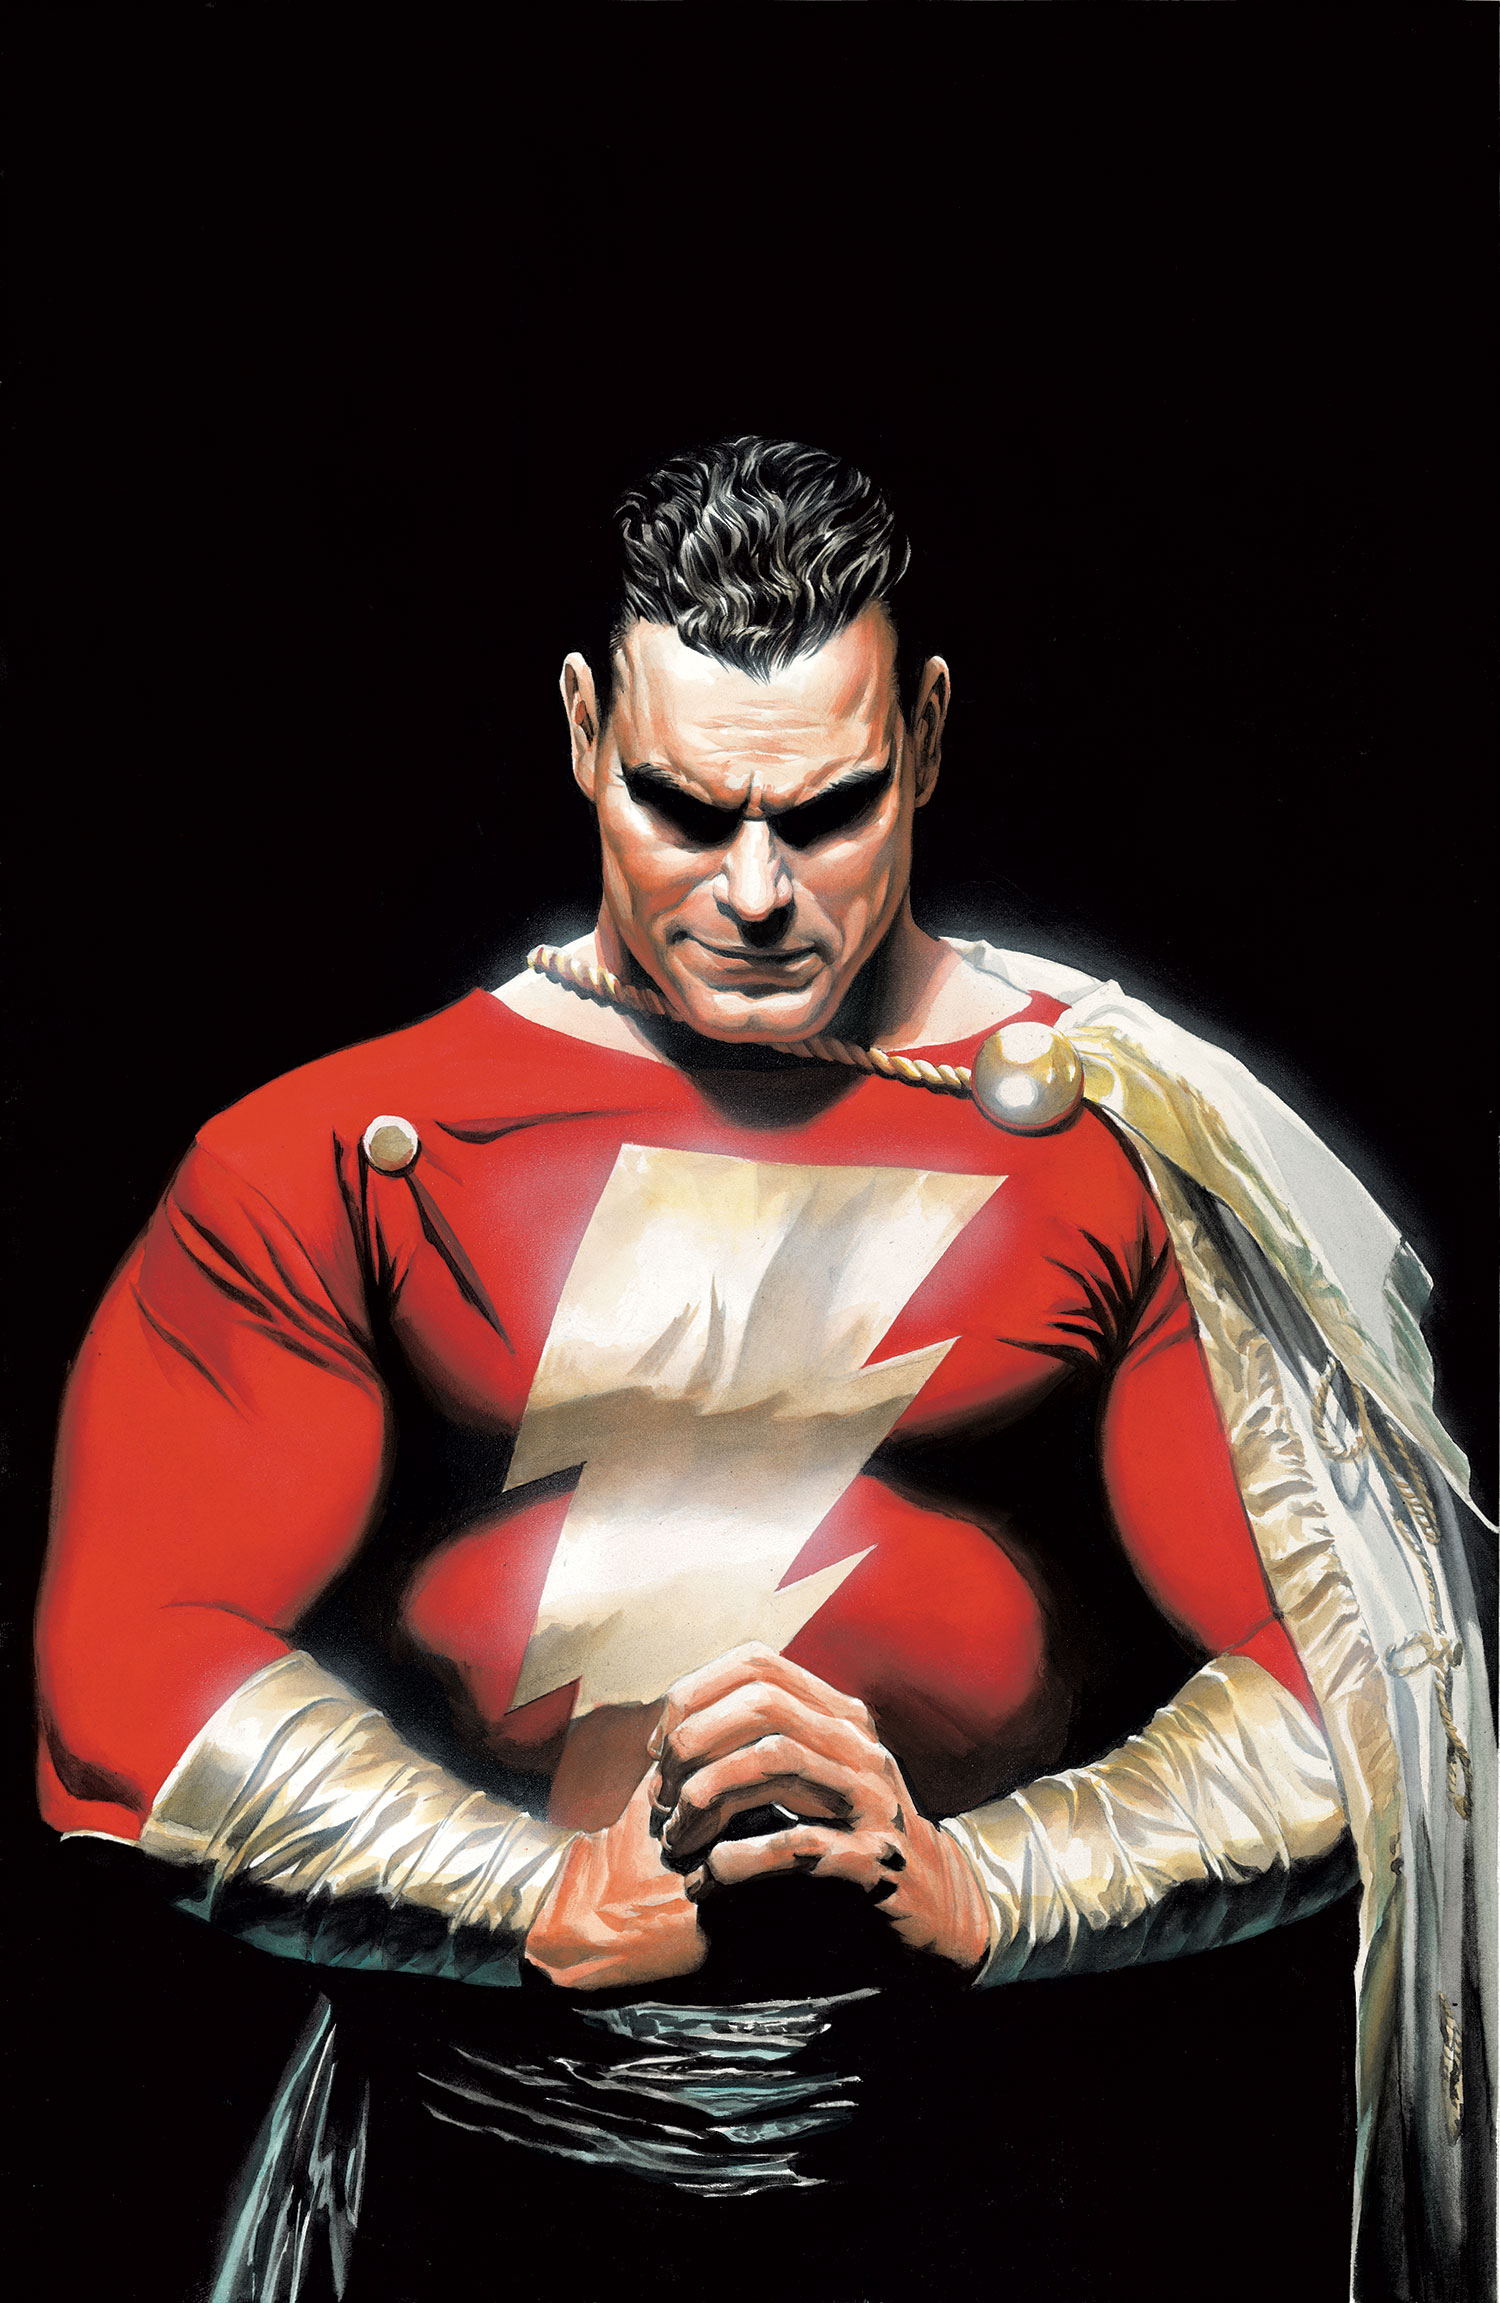 July 31, 2018 at 10:11AM – New Pin : Captain Marvel of Two Worlds by Nick  Perks #NickPerks #TheFlashofTwoWorldsParody #CaptainMarvel #Shazam  #BillyBatson #TheWorldsMightestMortal #JSA #JusticeSociety #JusticeLeague  #JL #FawcettCity #WHIZ